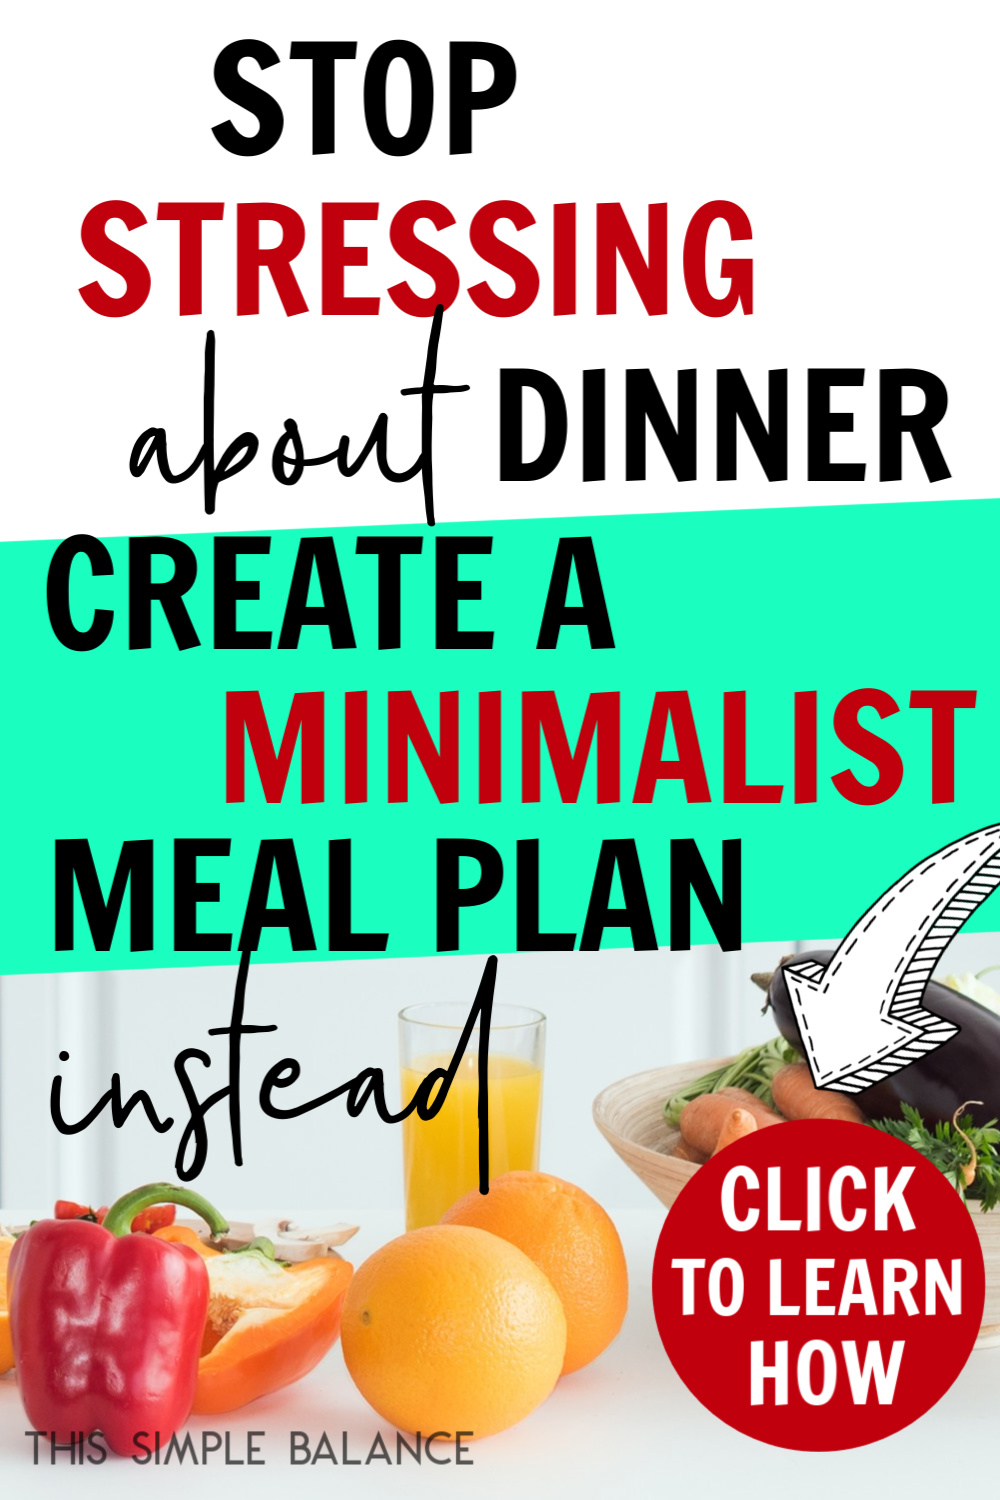 kitchen counter with meal ingredients with text overlay, "stop stressing about dinner and create a minimalist meal plan instead - click to learn how"